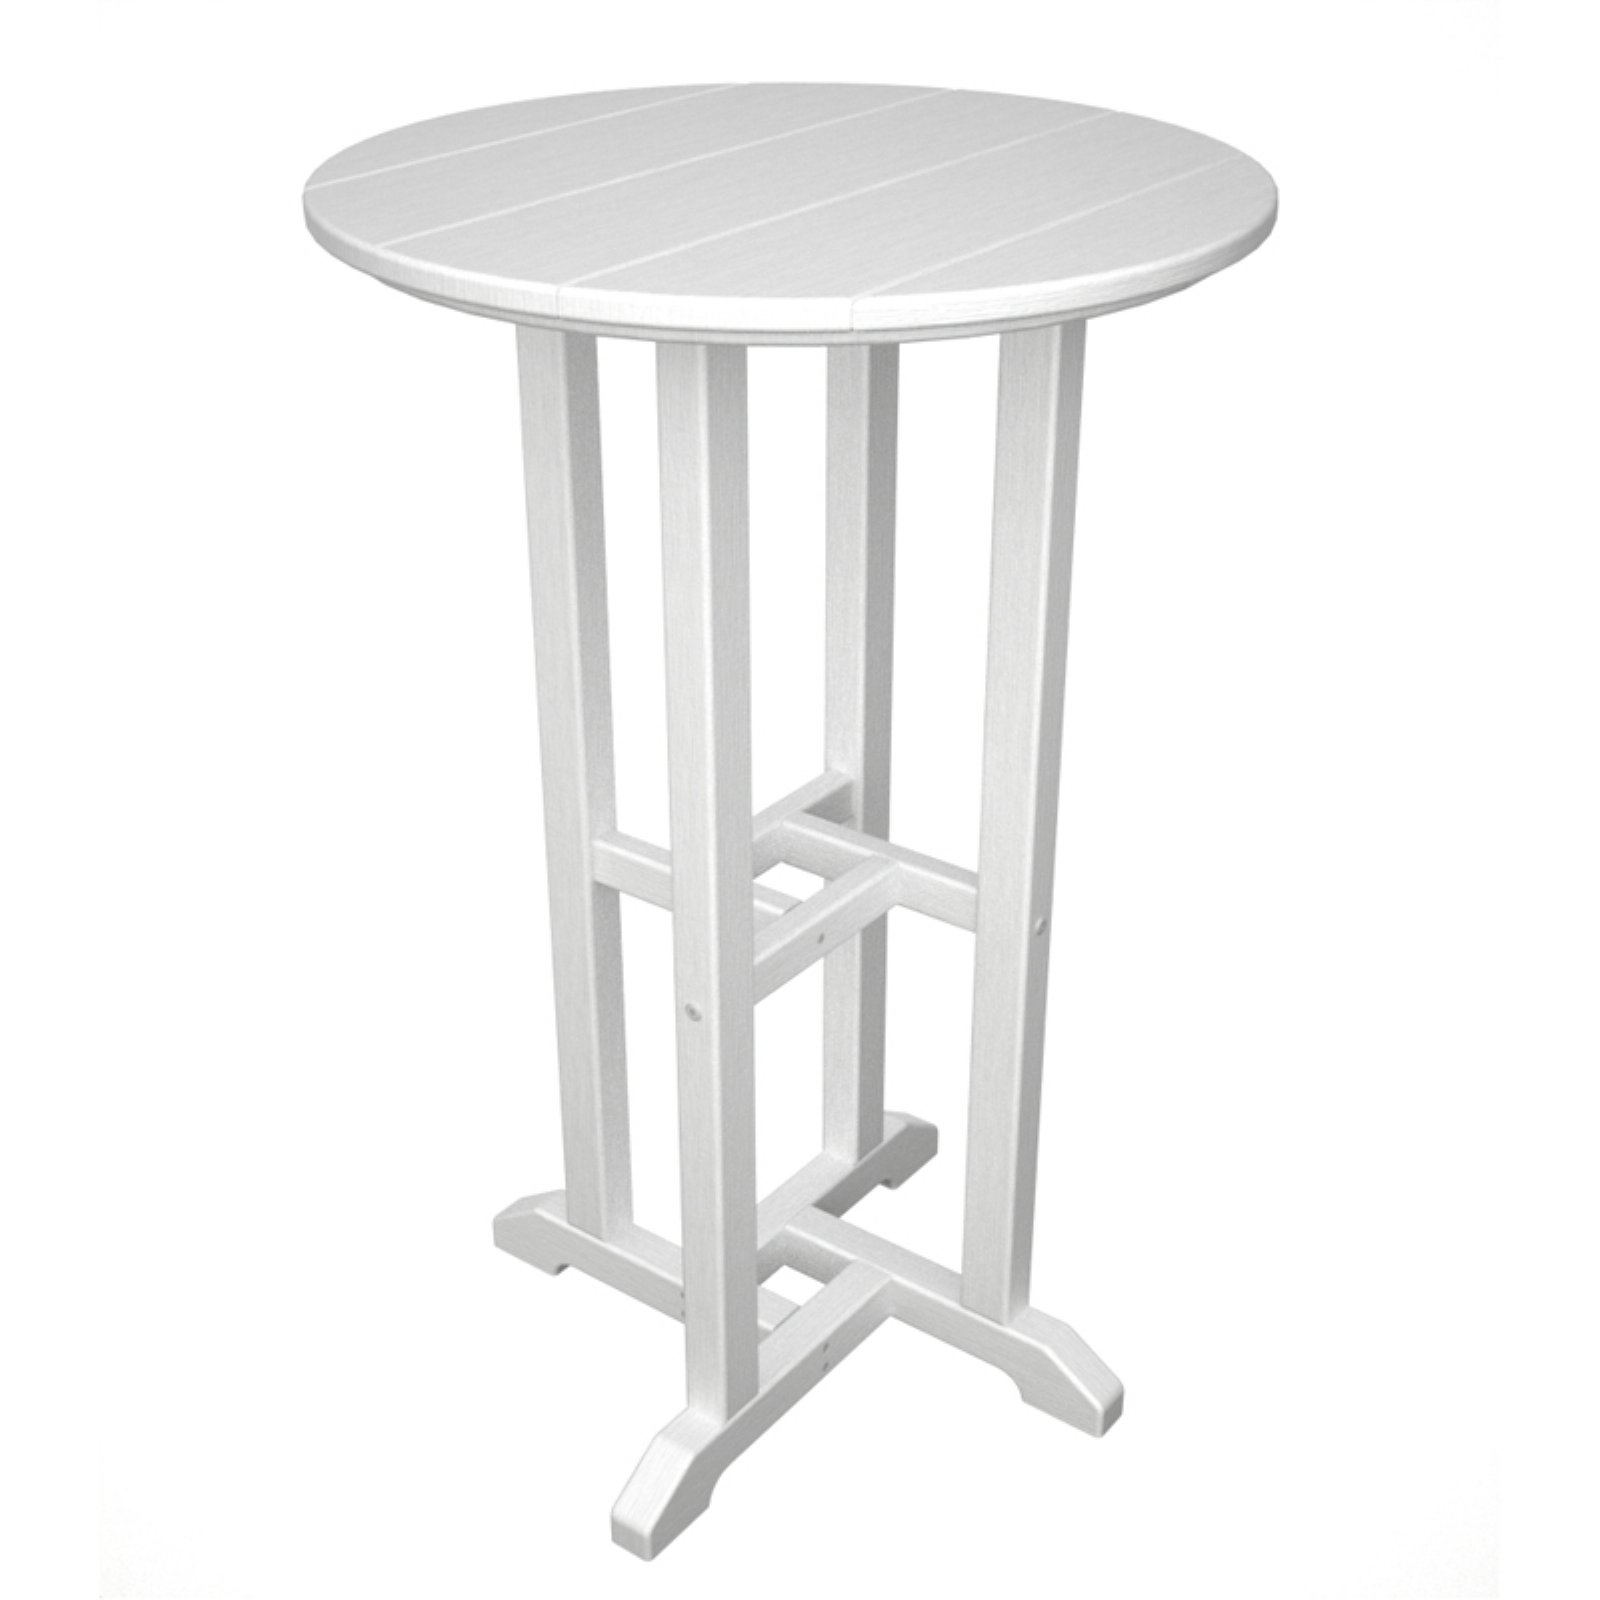 POLYWOOD&reg; Traditional 24 in. Round Counter Height Table - image 2 of 2